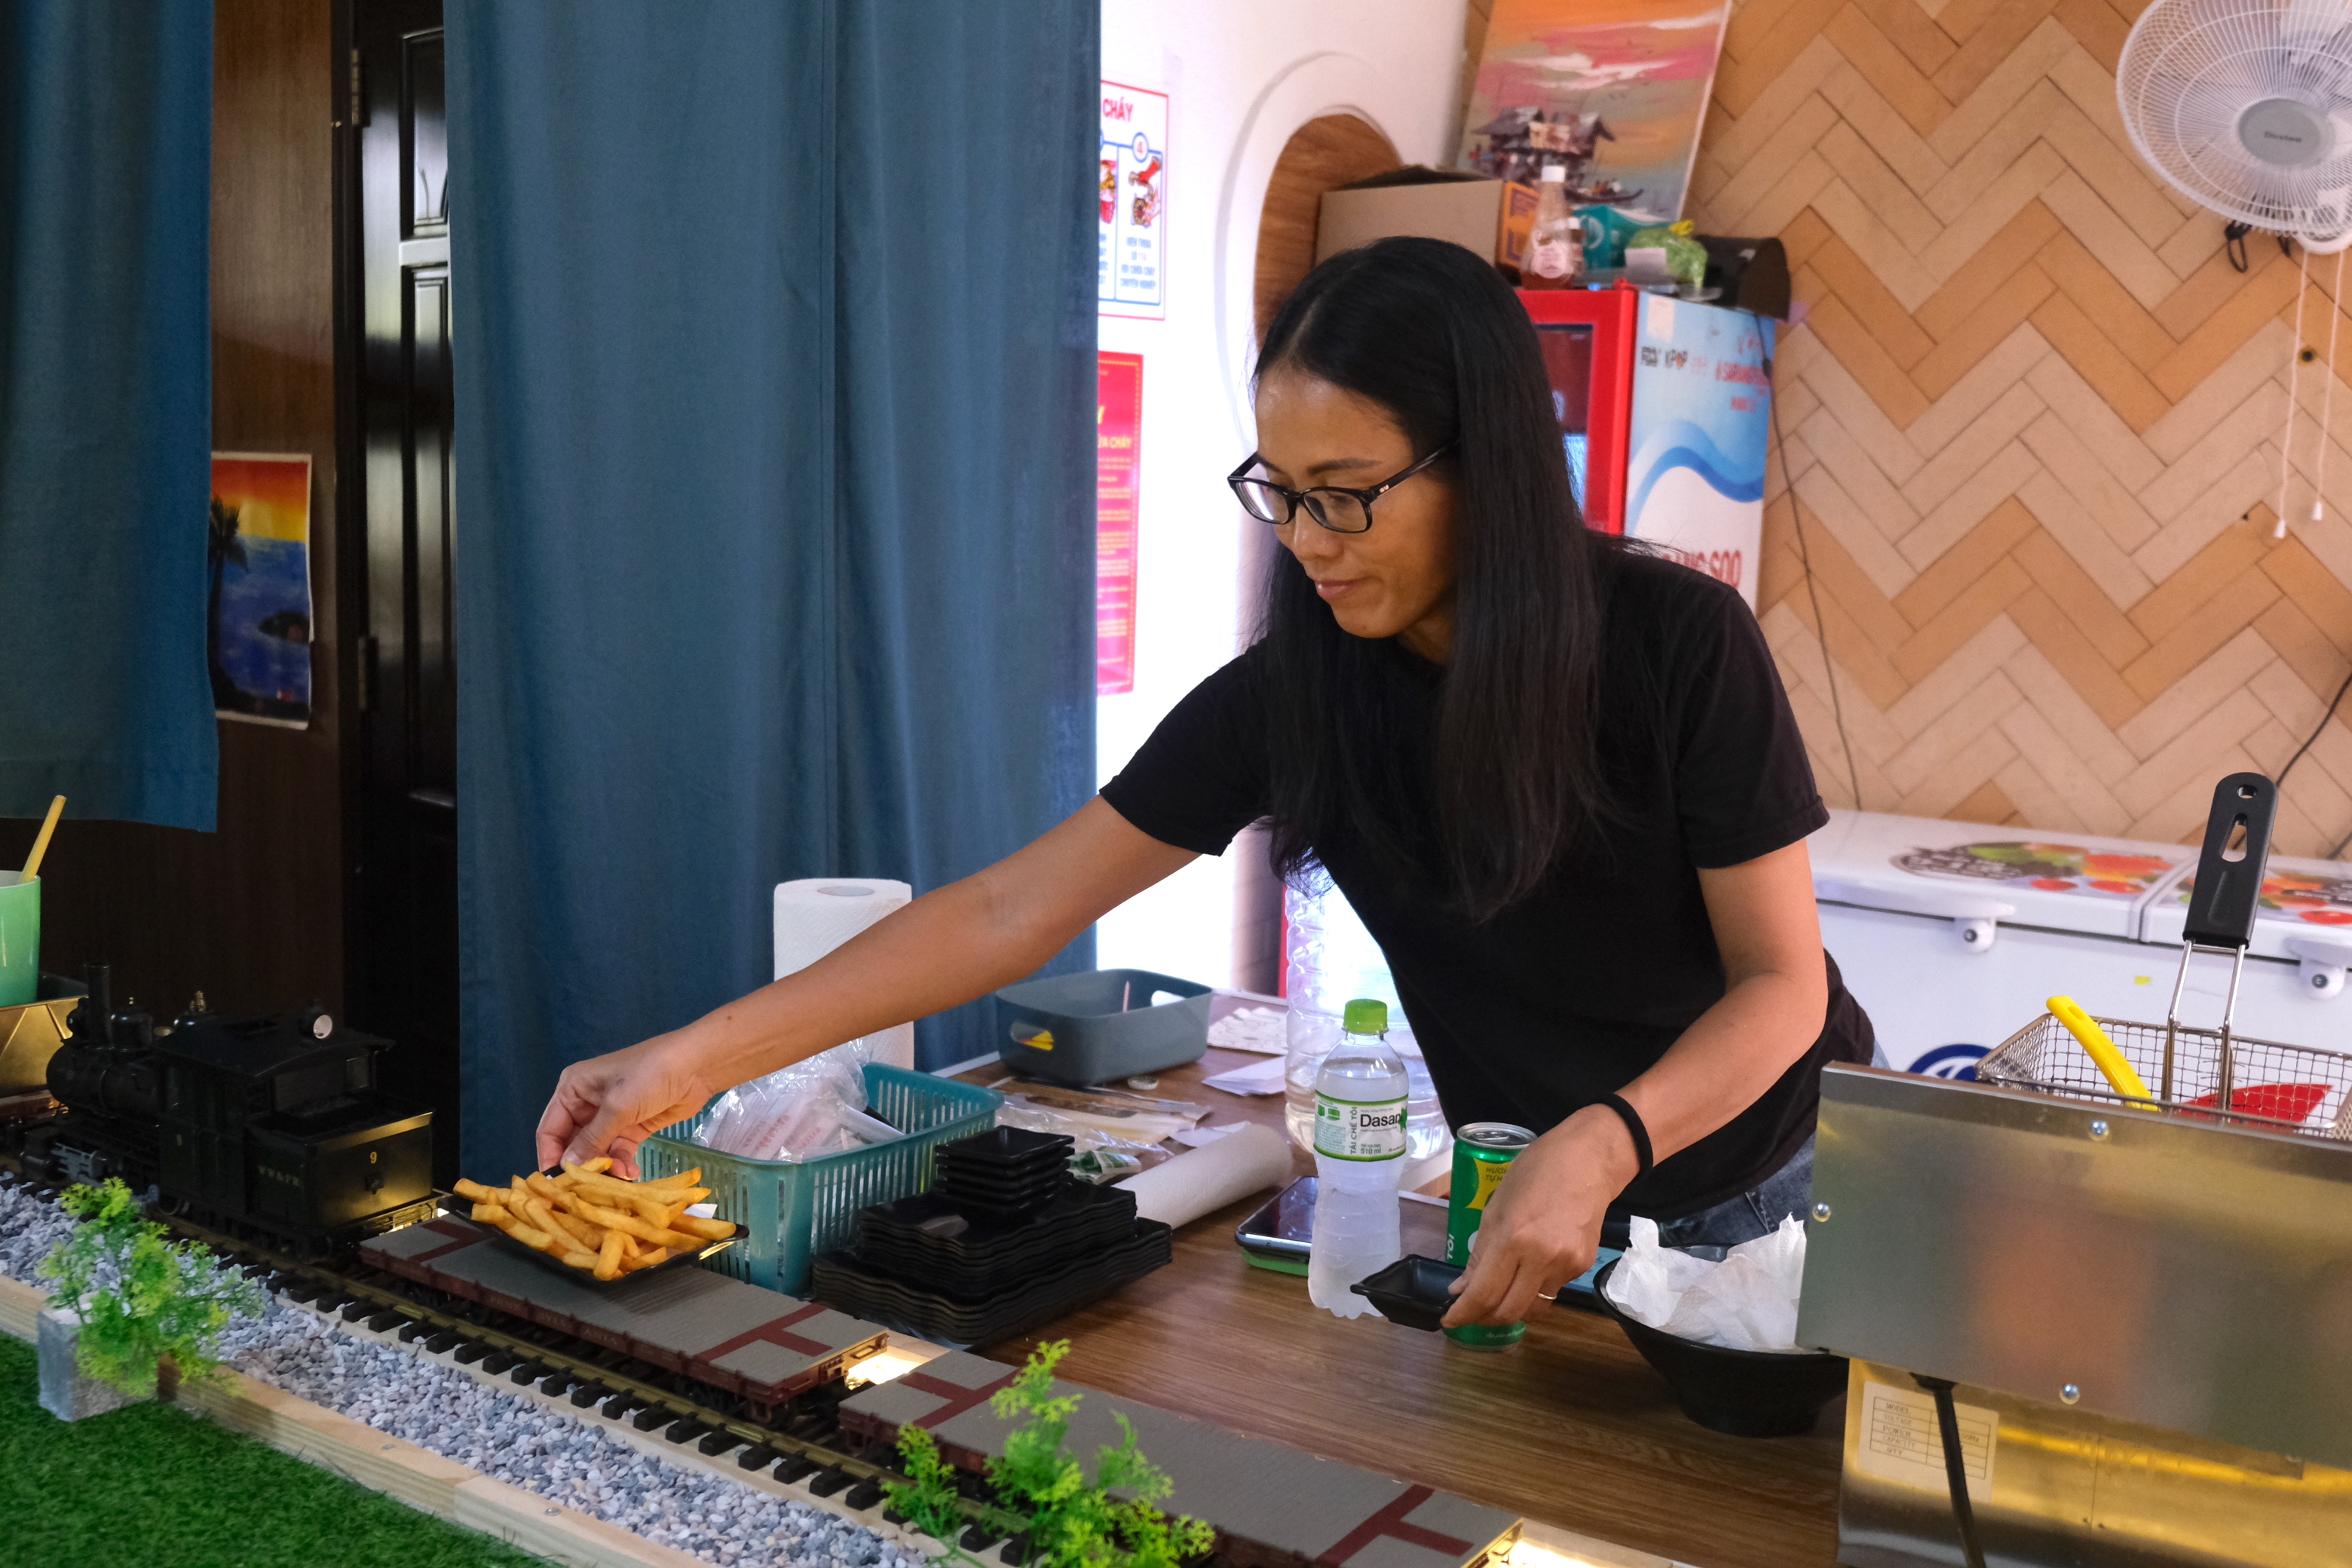 Nguyen Thi Theu, owner of The Train Restaurant puts food on a model train to serve to diners at her restaurant in District 7, Ho Chi Minh City. Photo: Ngoc Phuong / Tuoi Tre News